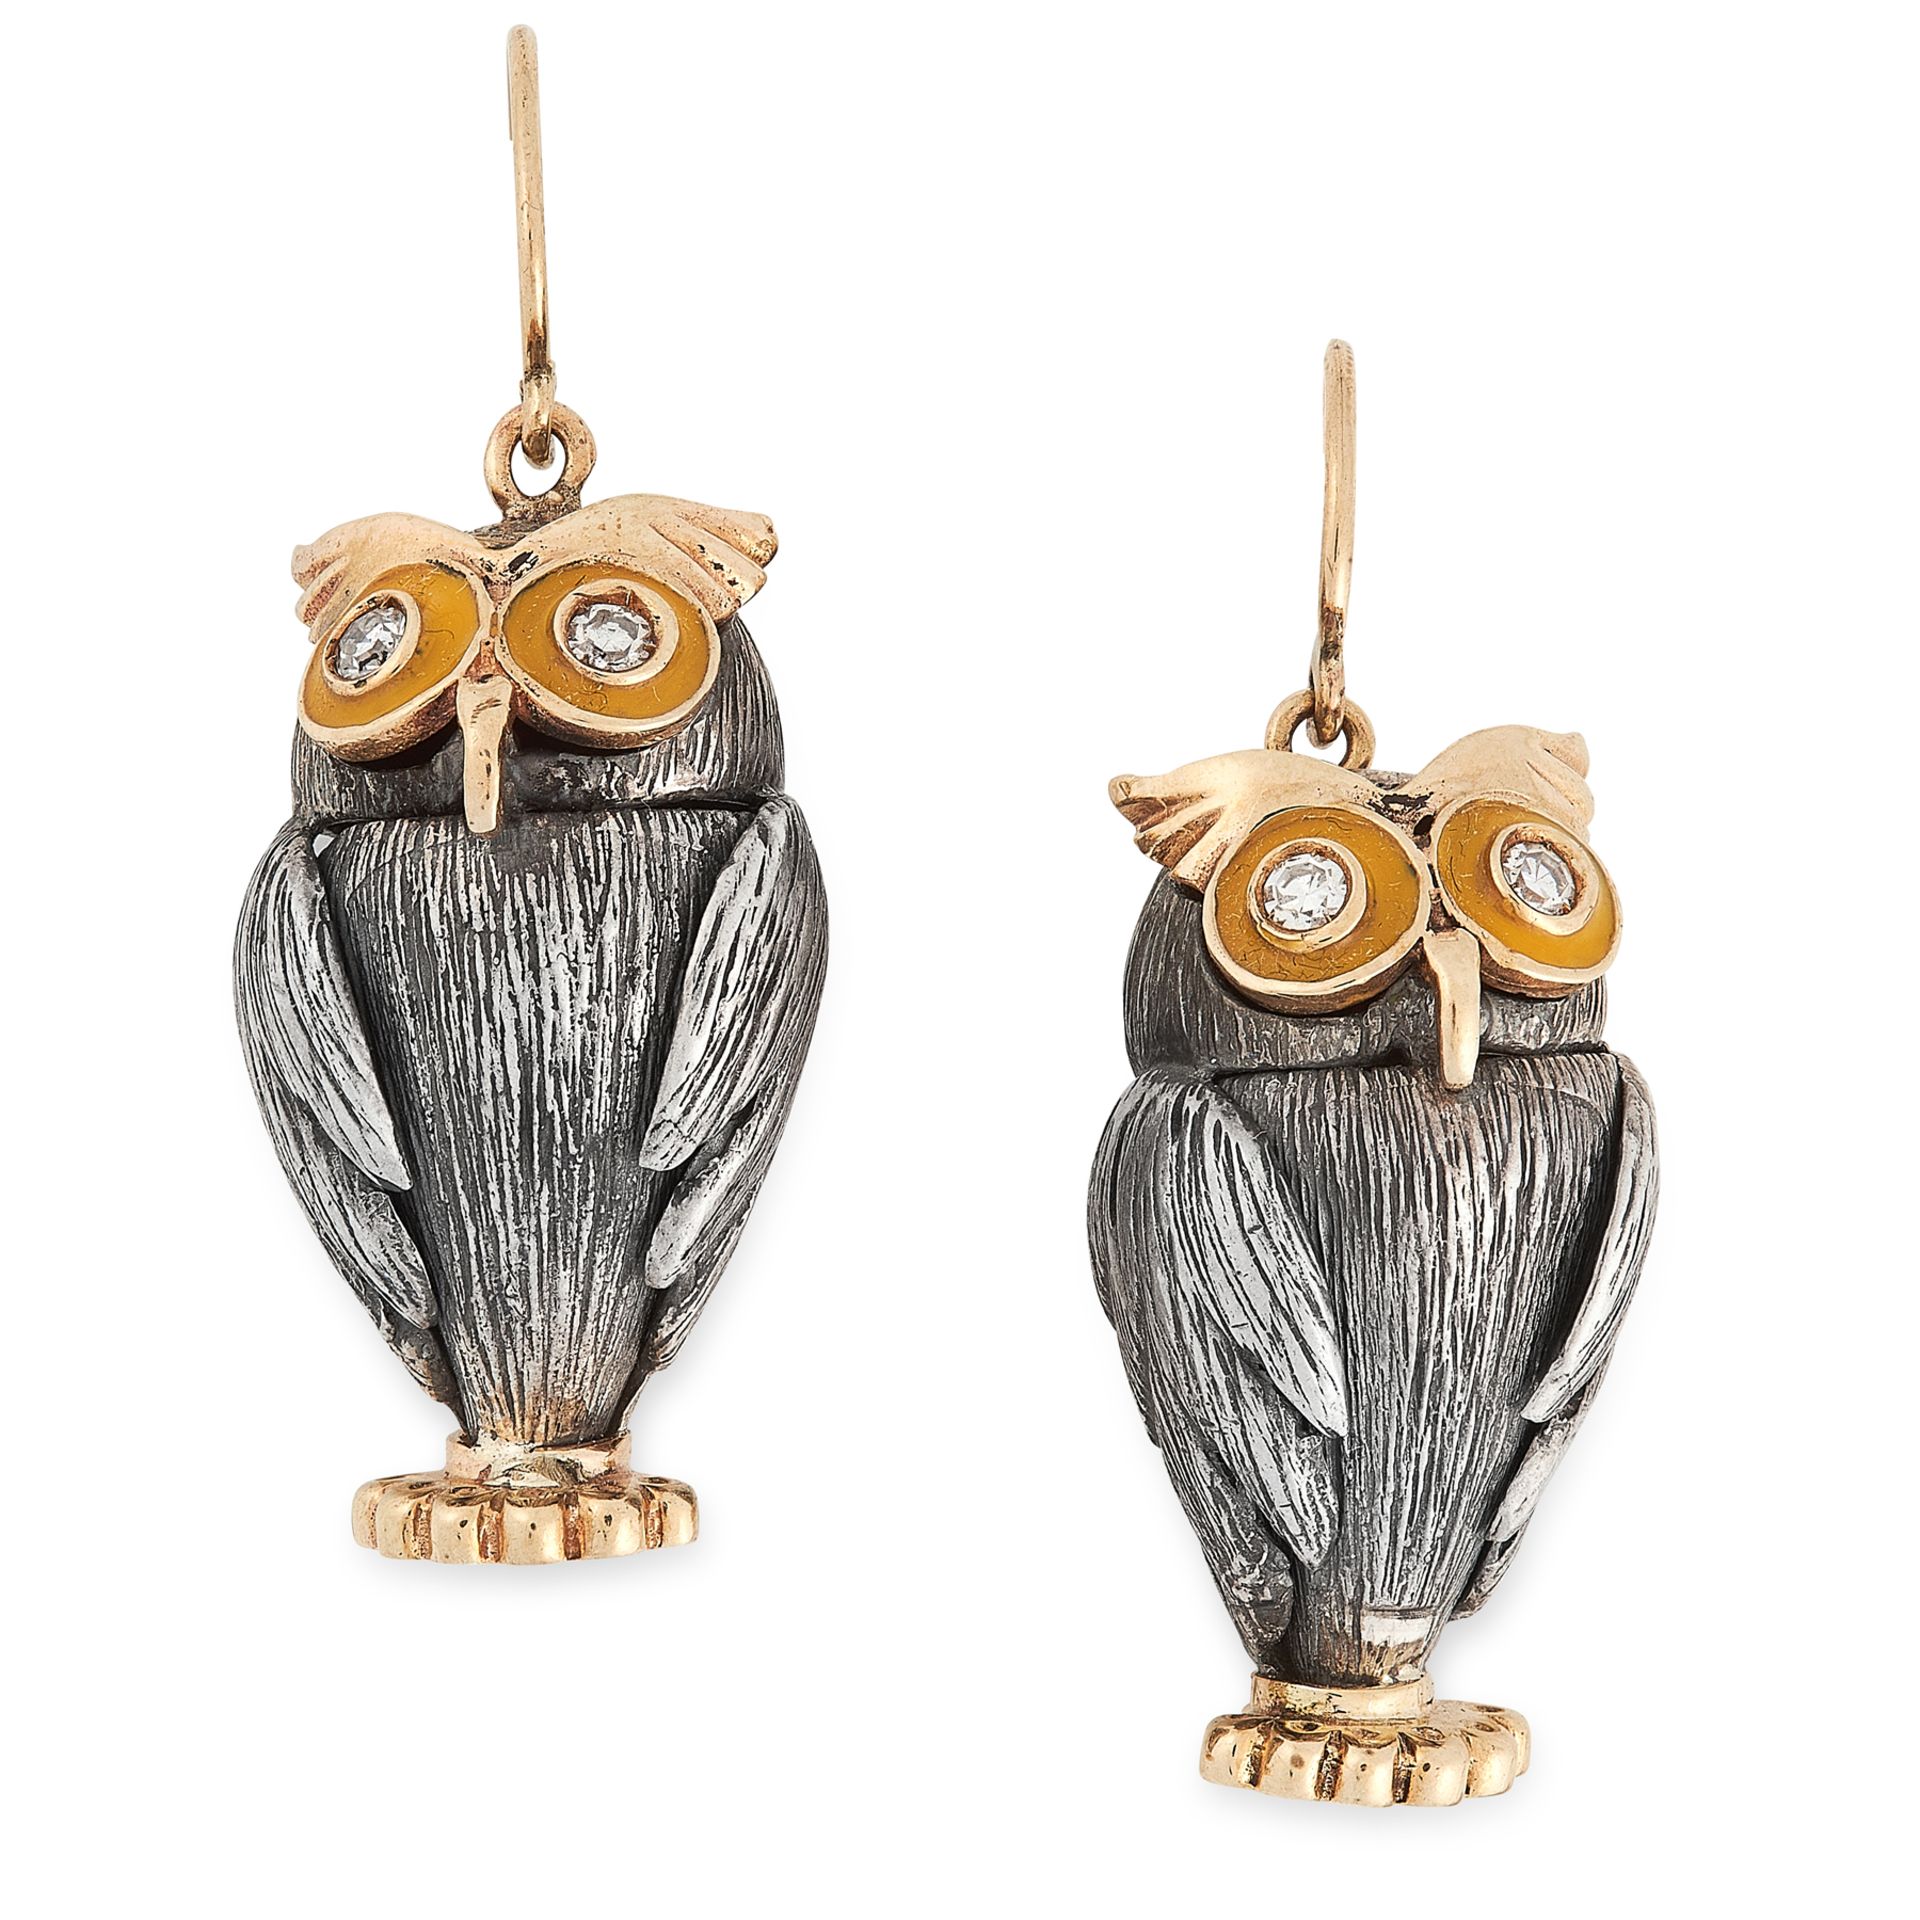 A PAIR OF DIAMOND AND ENAMEL OWL EARRINGS in yellow gold and silver, each designed as an owl, with